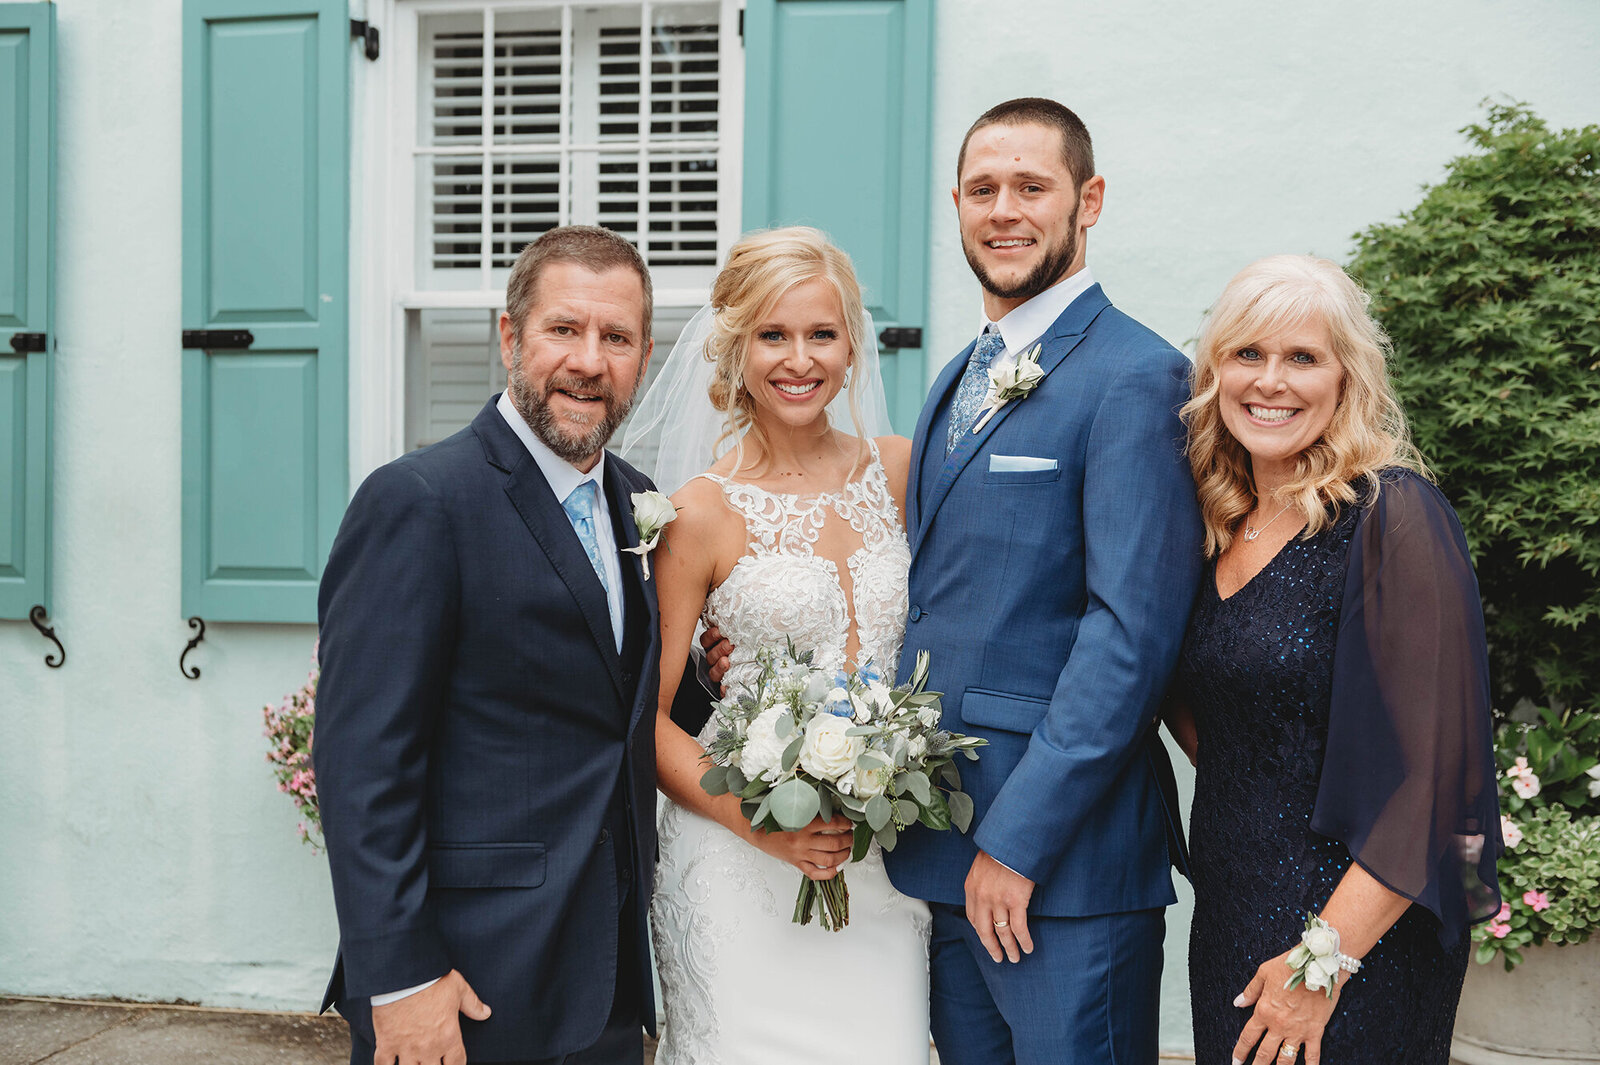 Newlyweds pose with parents of the bride after their Micro-Wedding Ceremony in Charleston, SC.